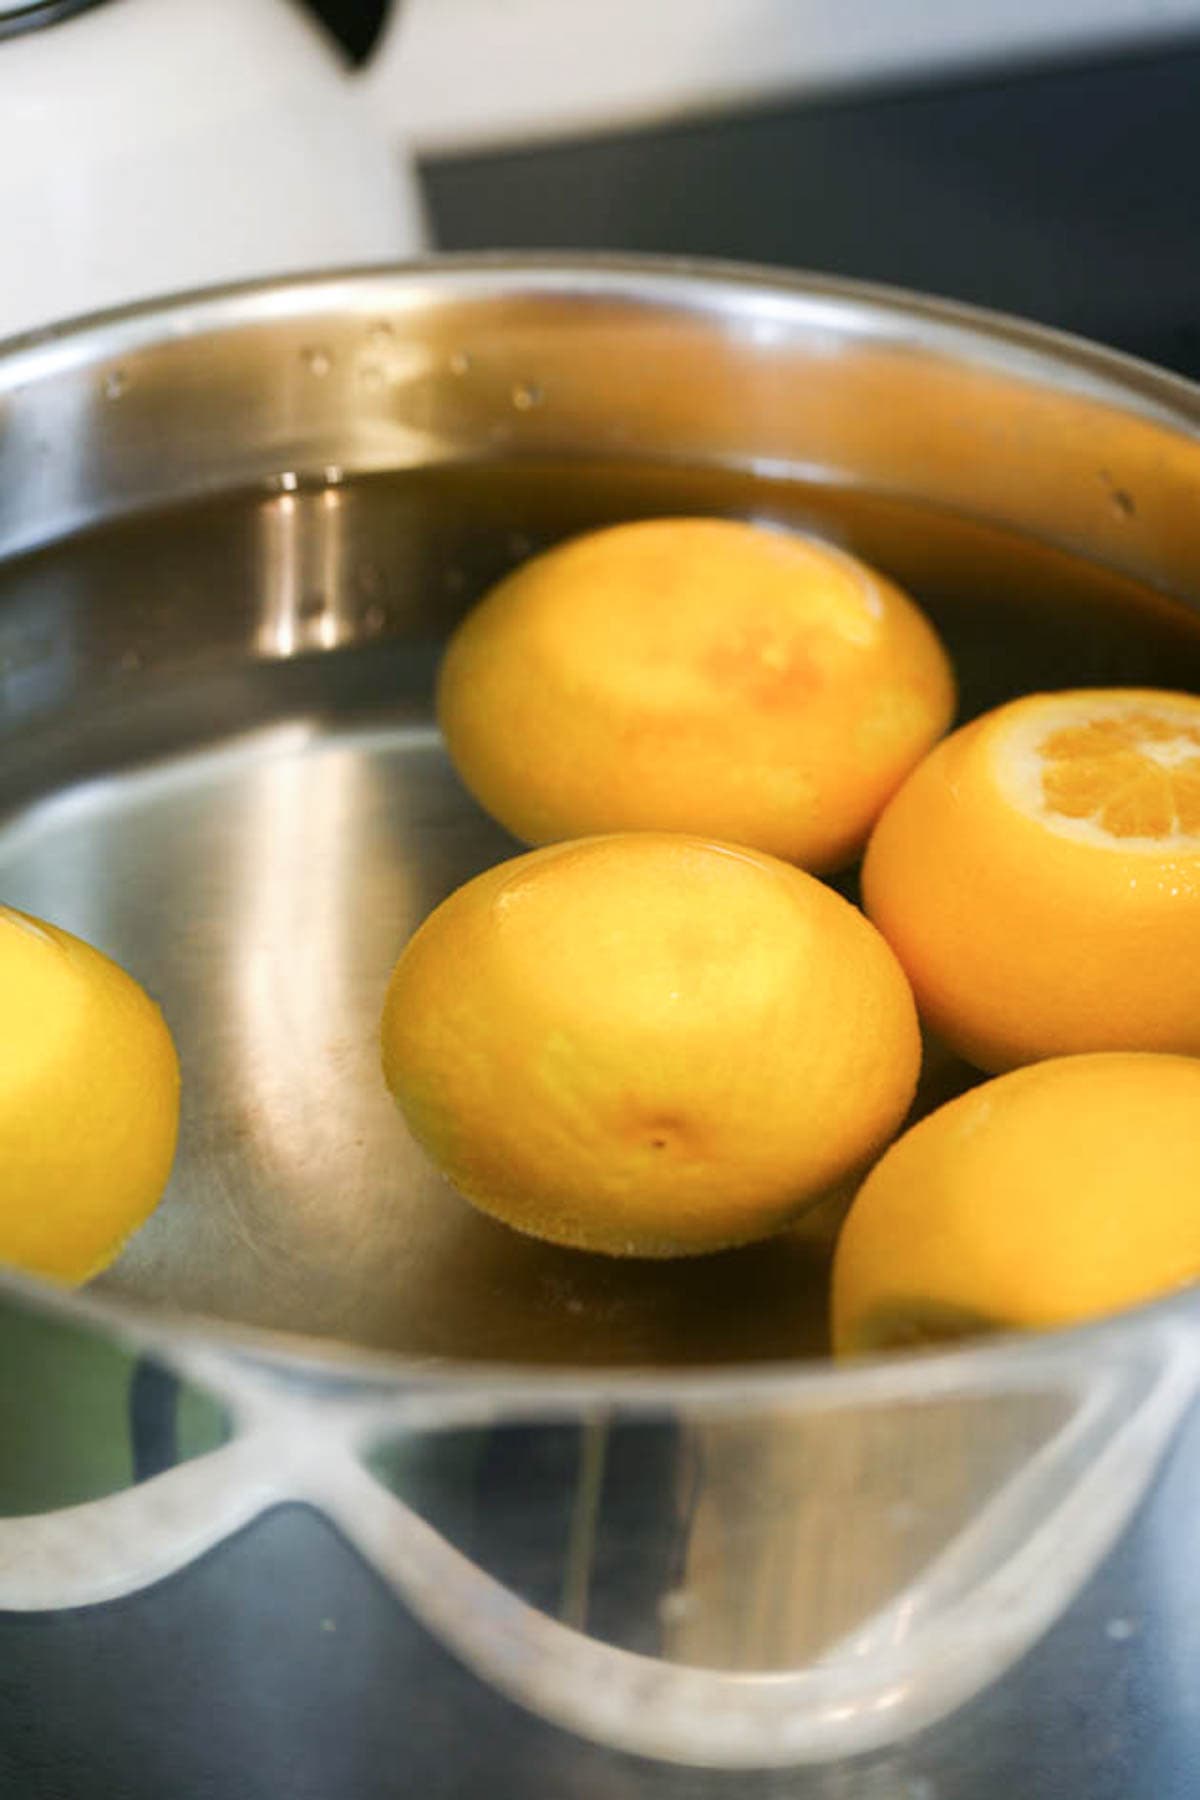 boiling the oranges